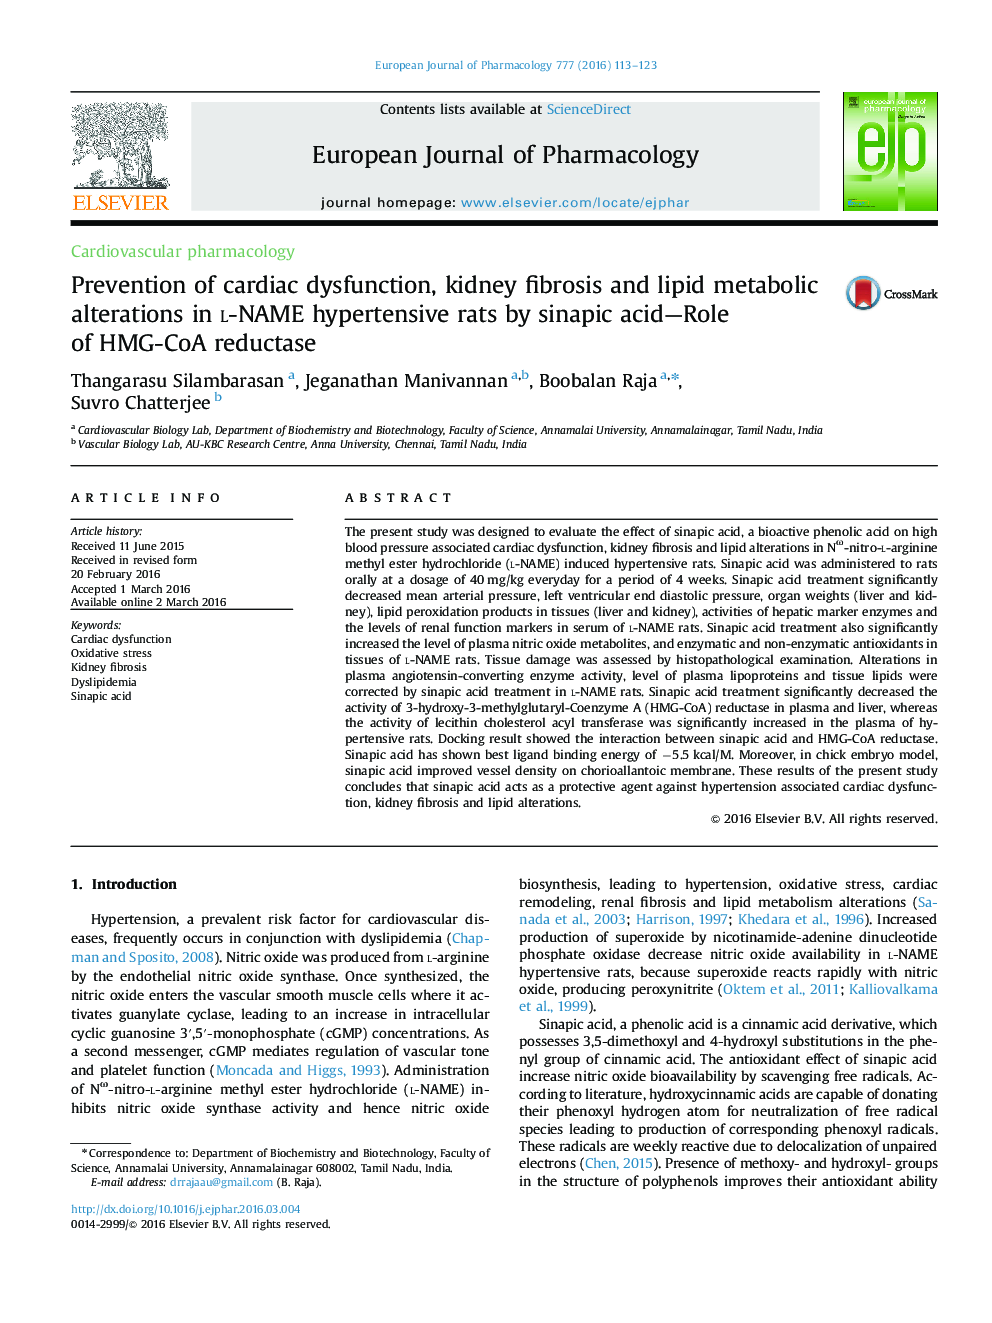 Prevention of cardiac dysfunction, kidney fibrosis and lipid metabolic alterations in l-NAME hypertensive rats by sinapic acid—Role of HMG-CoA reductase